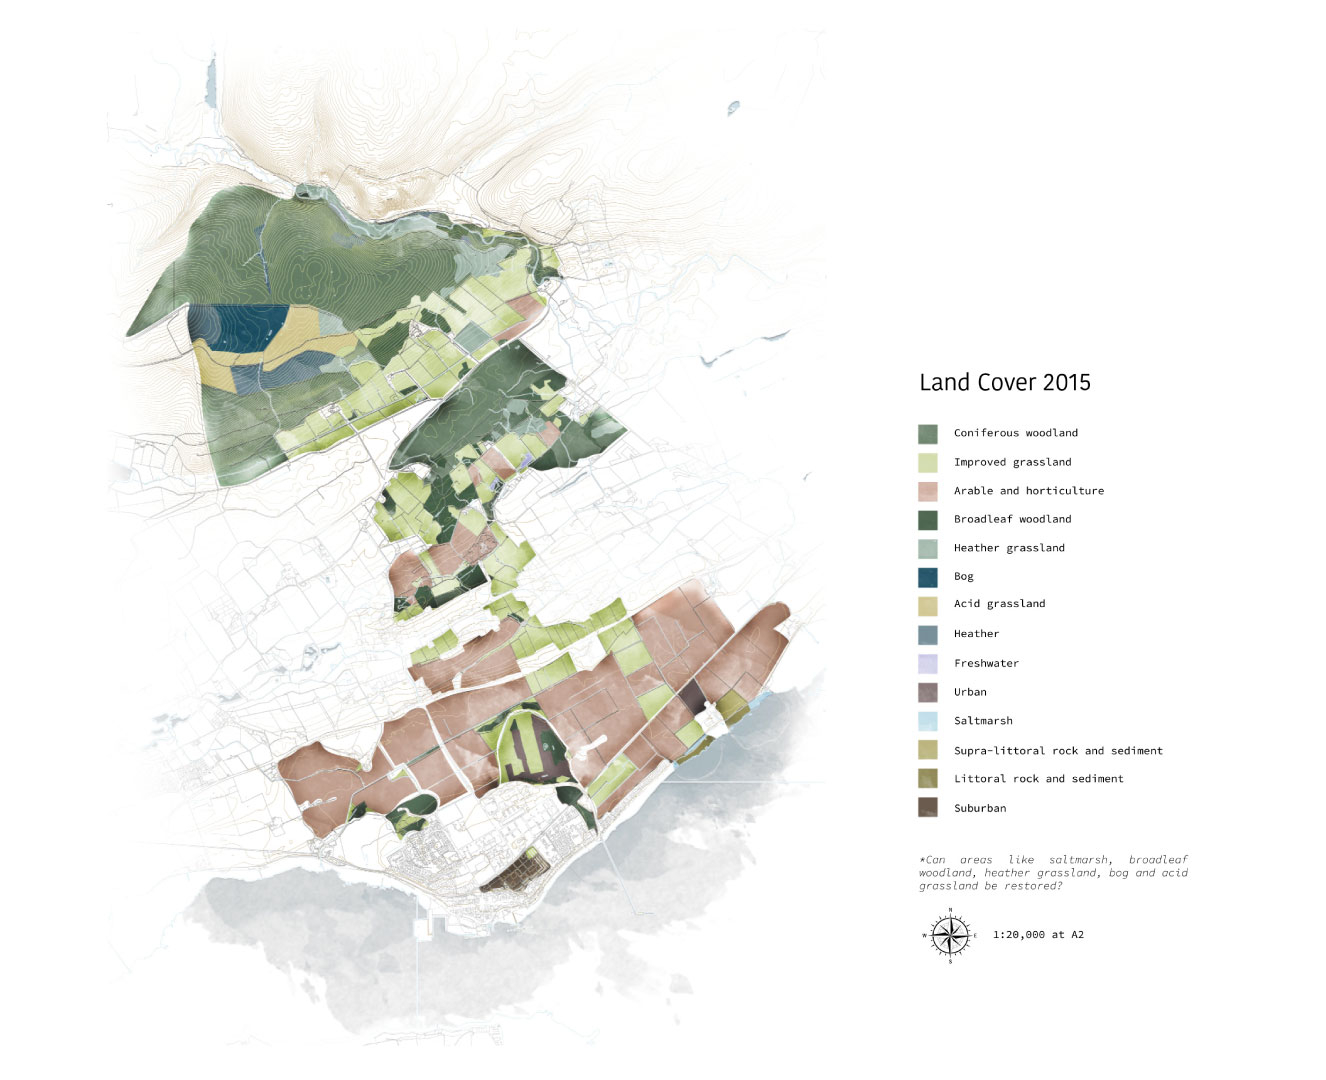 Site Analysis - Land Cover